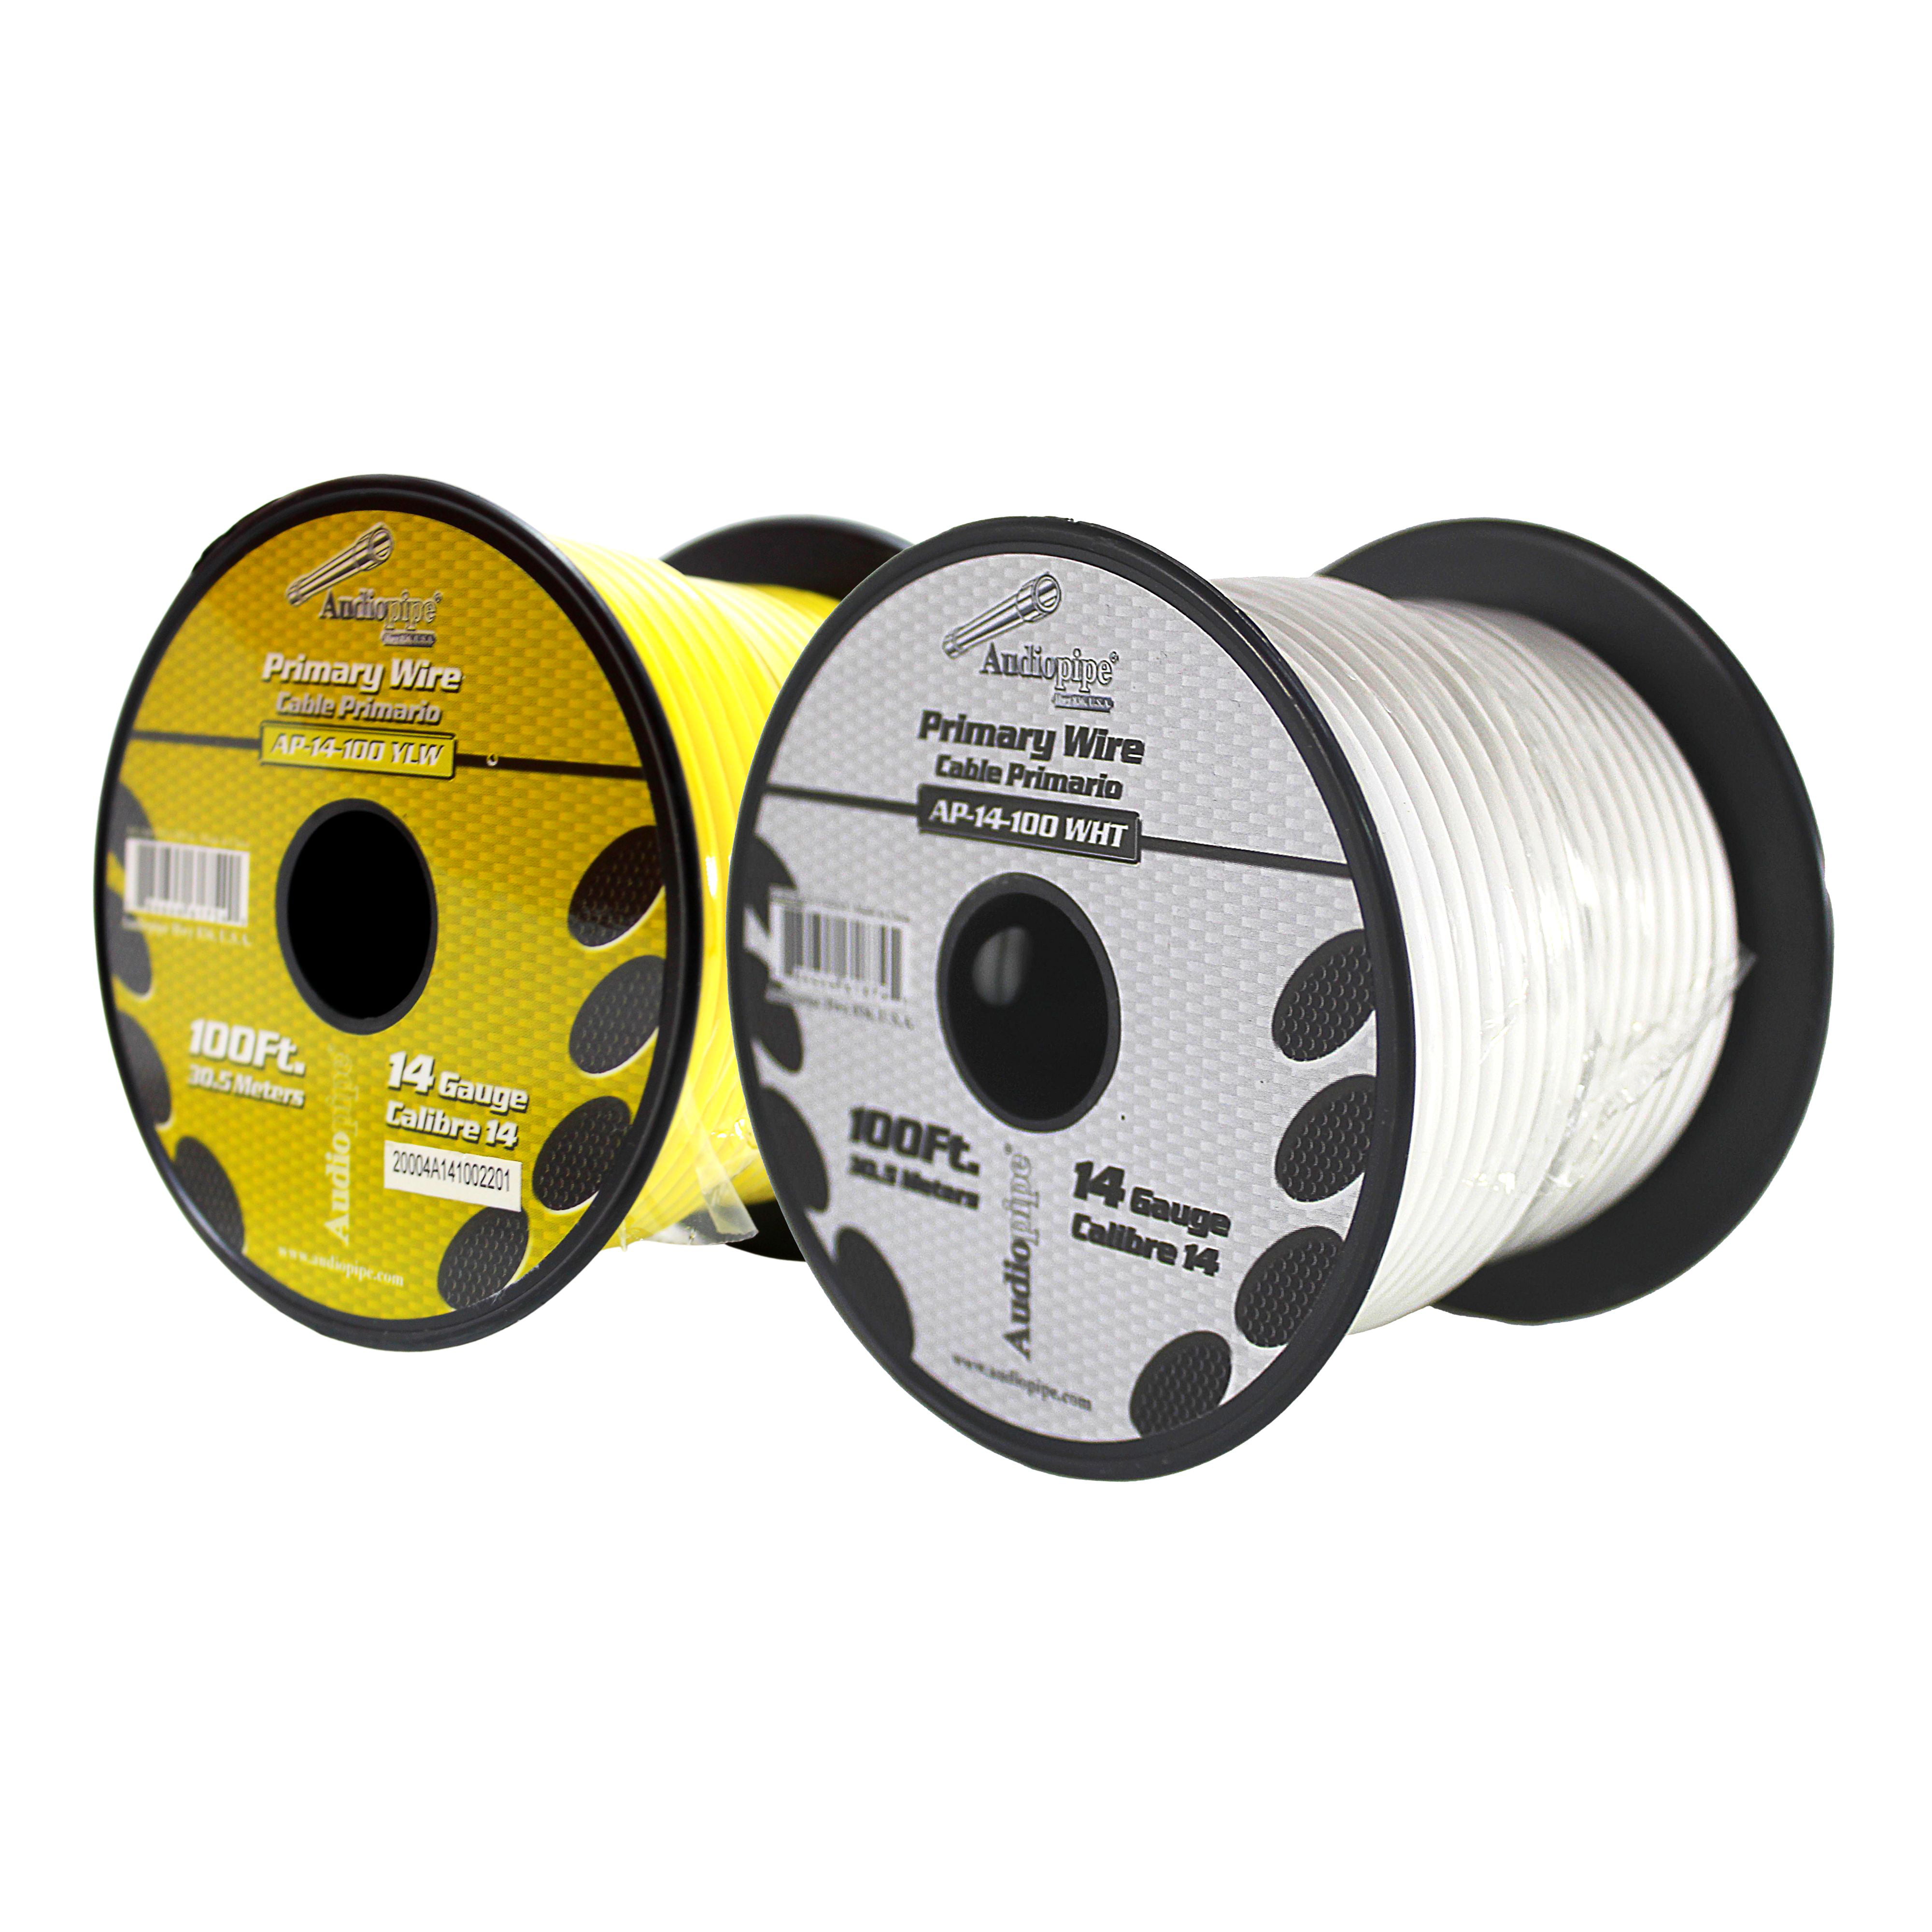 Primary Wire Spool 2